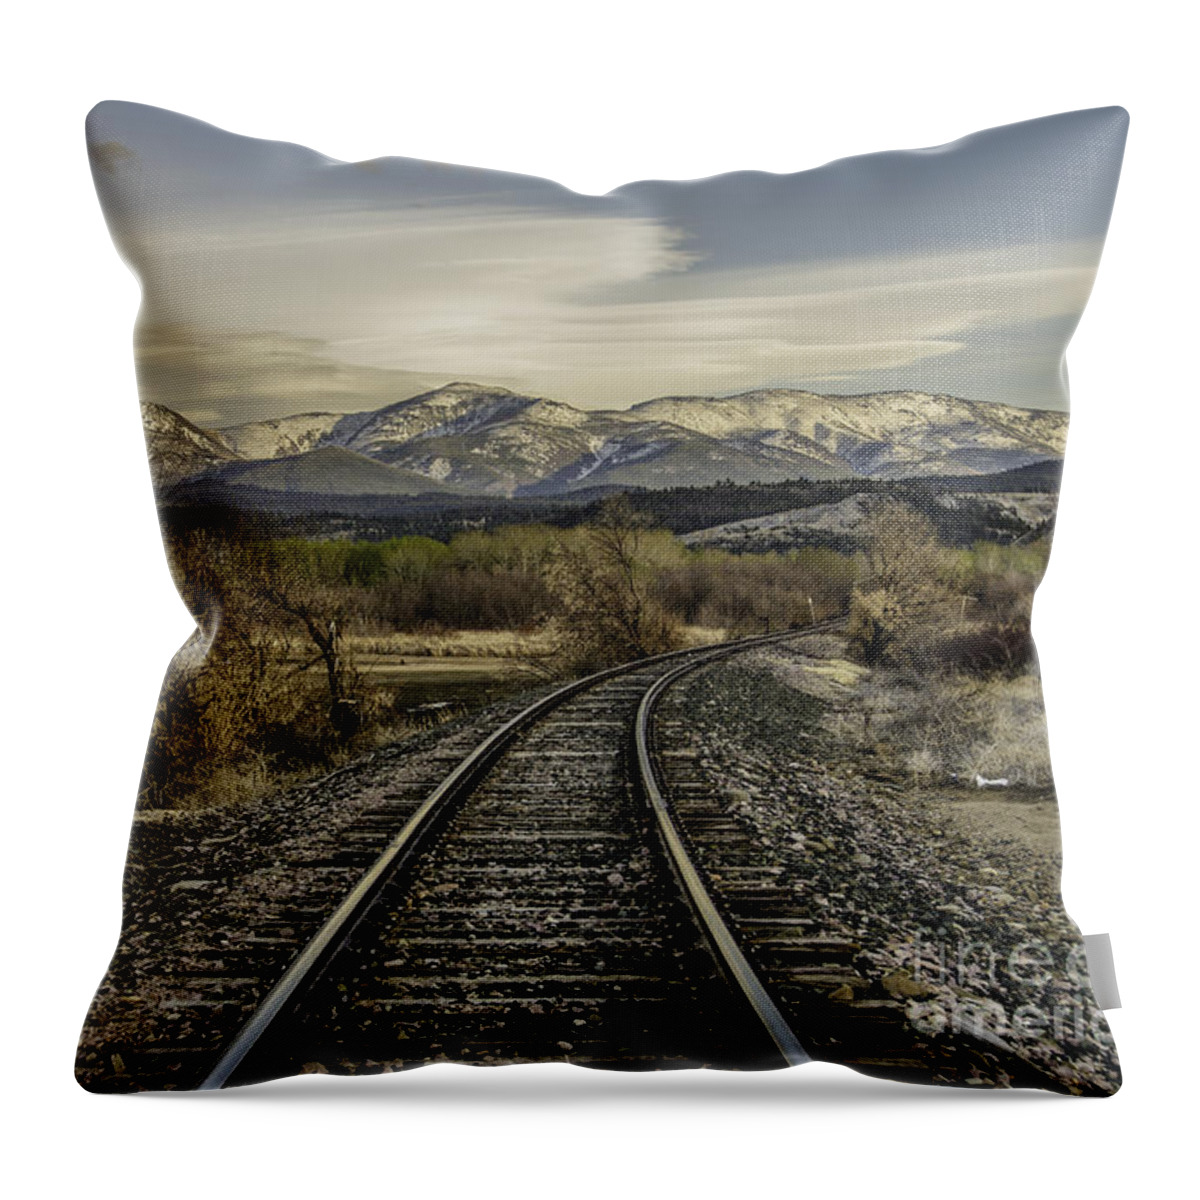 Beauty In Nature Throw Pillow featuring the photograph Curve in the Tracks by Sue Smith